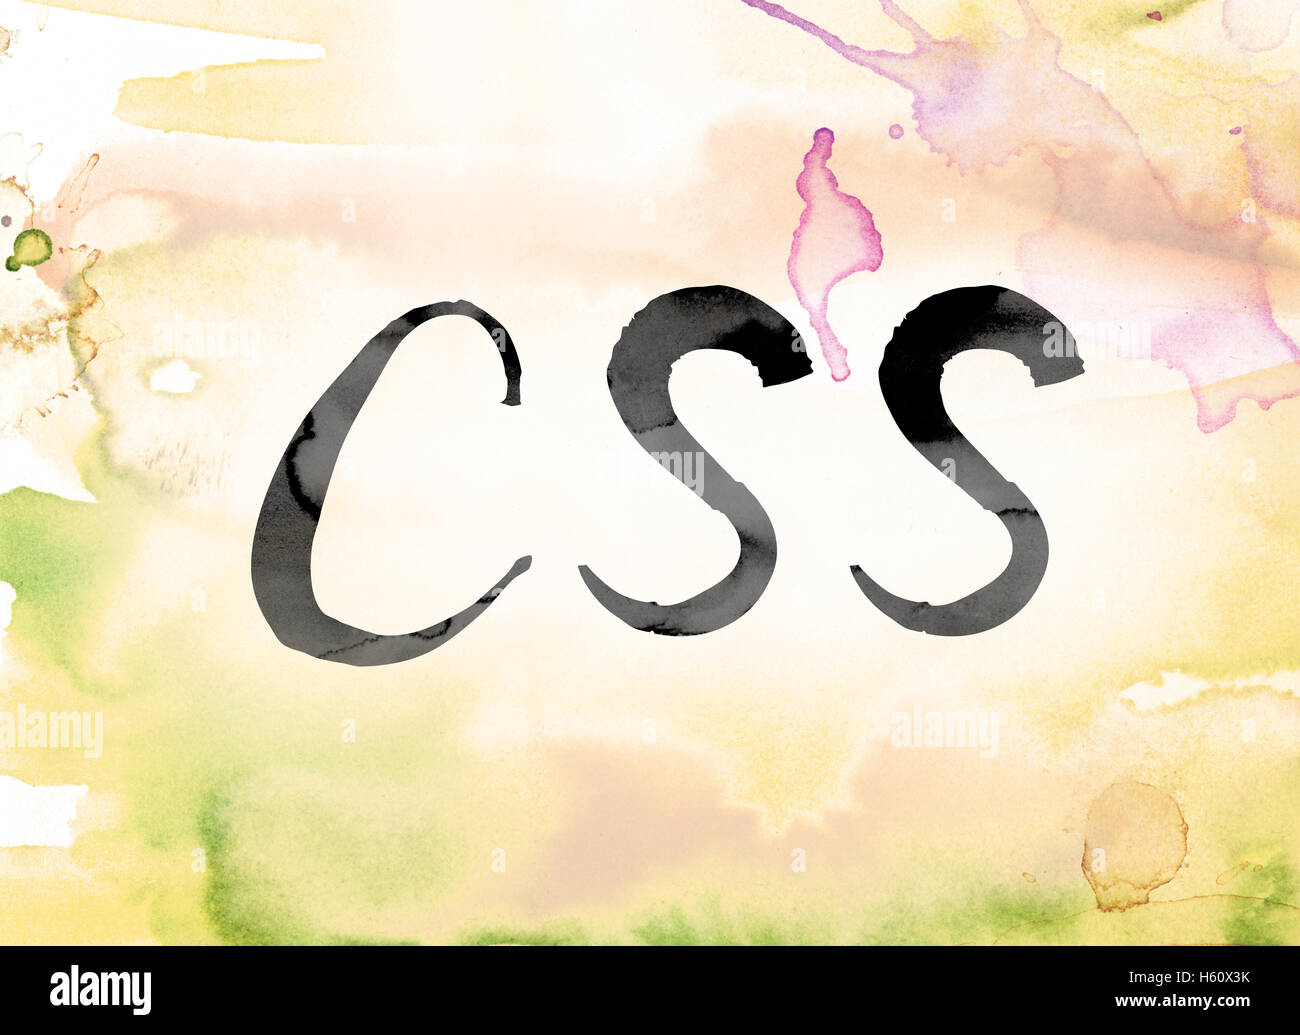 The Word Css Painted In Black Ink Over A Colorful Watercolor